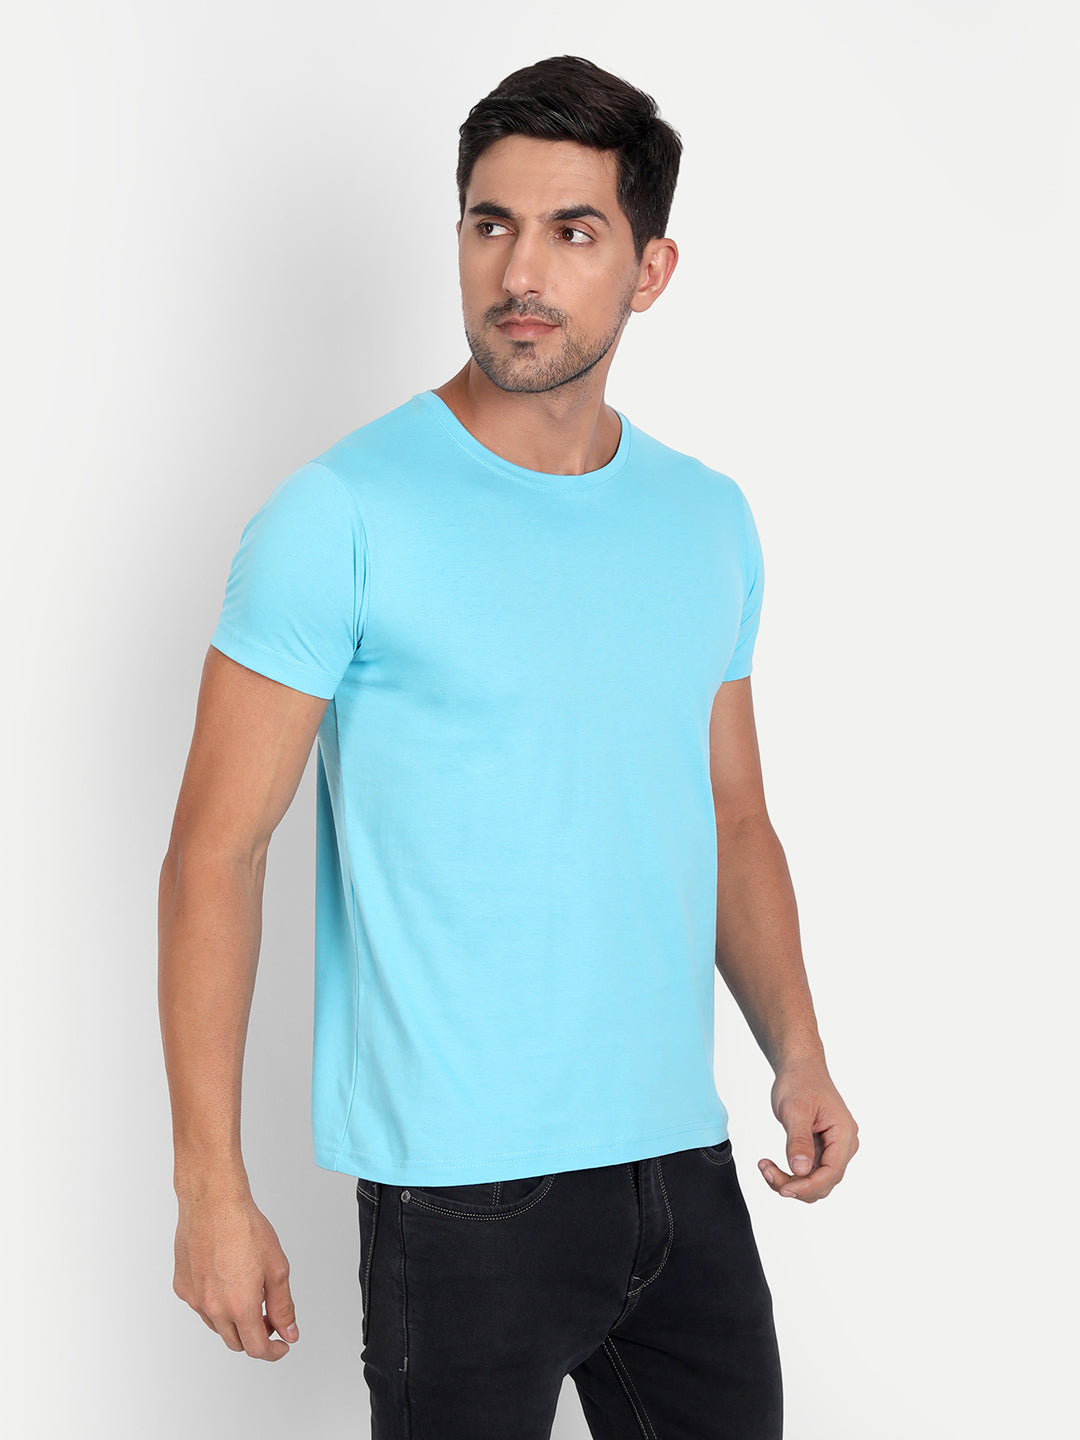 Classic Tee - Starling Blue